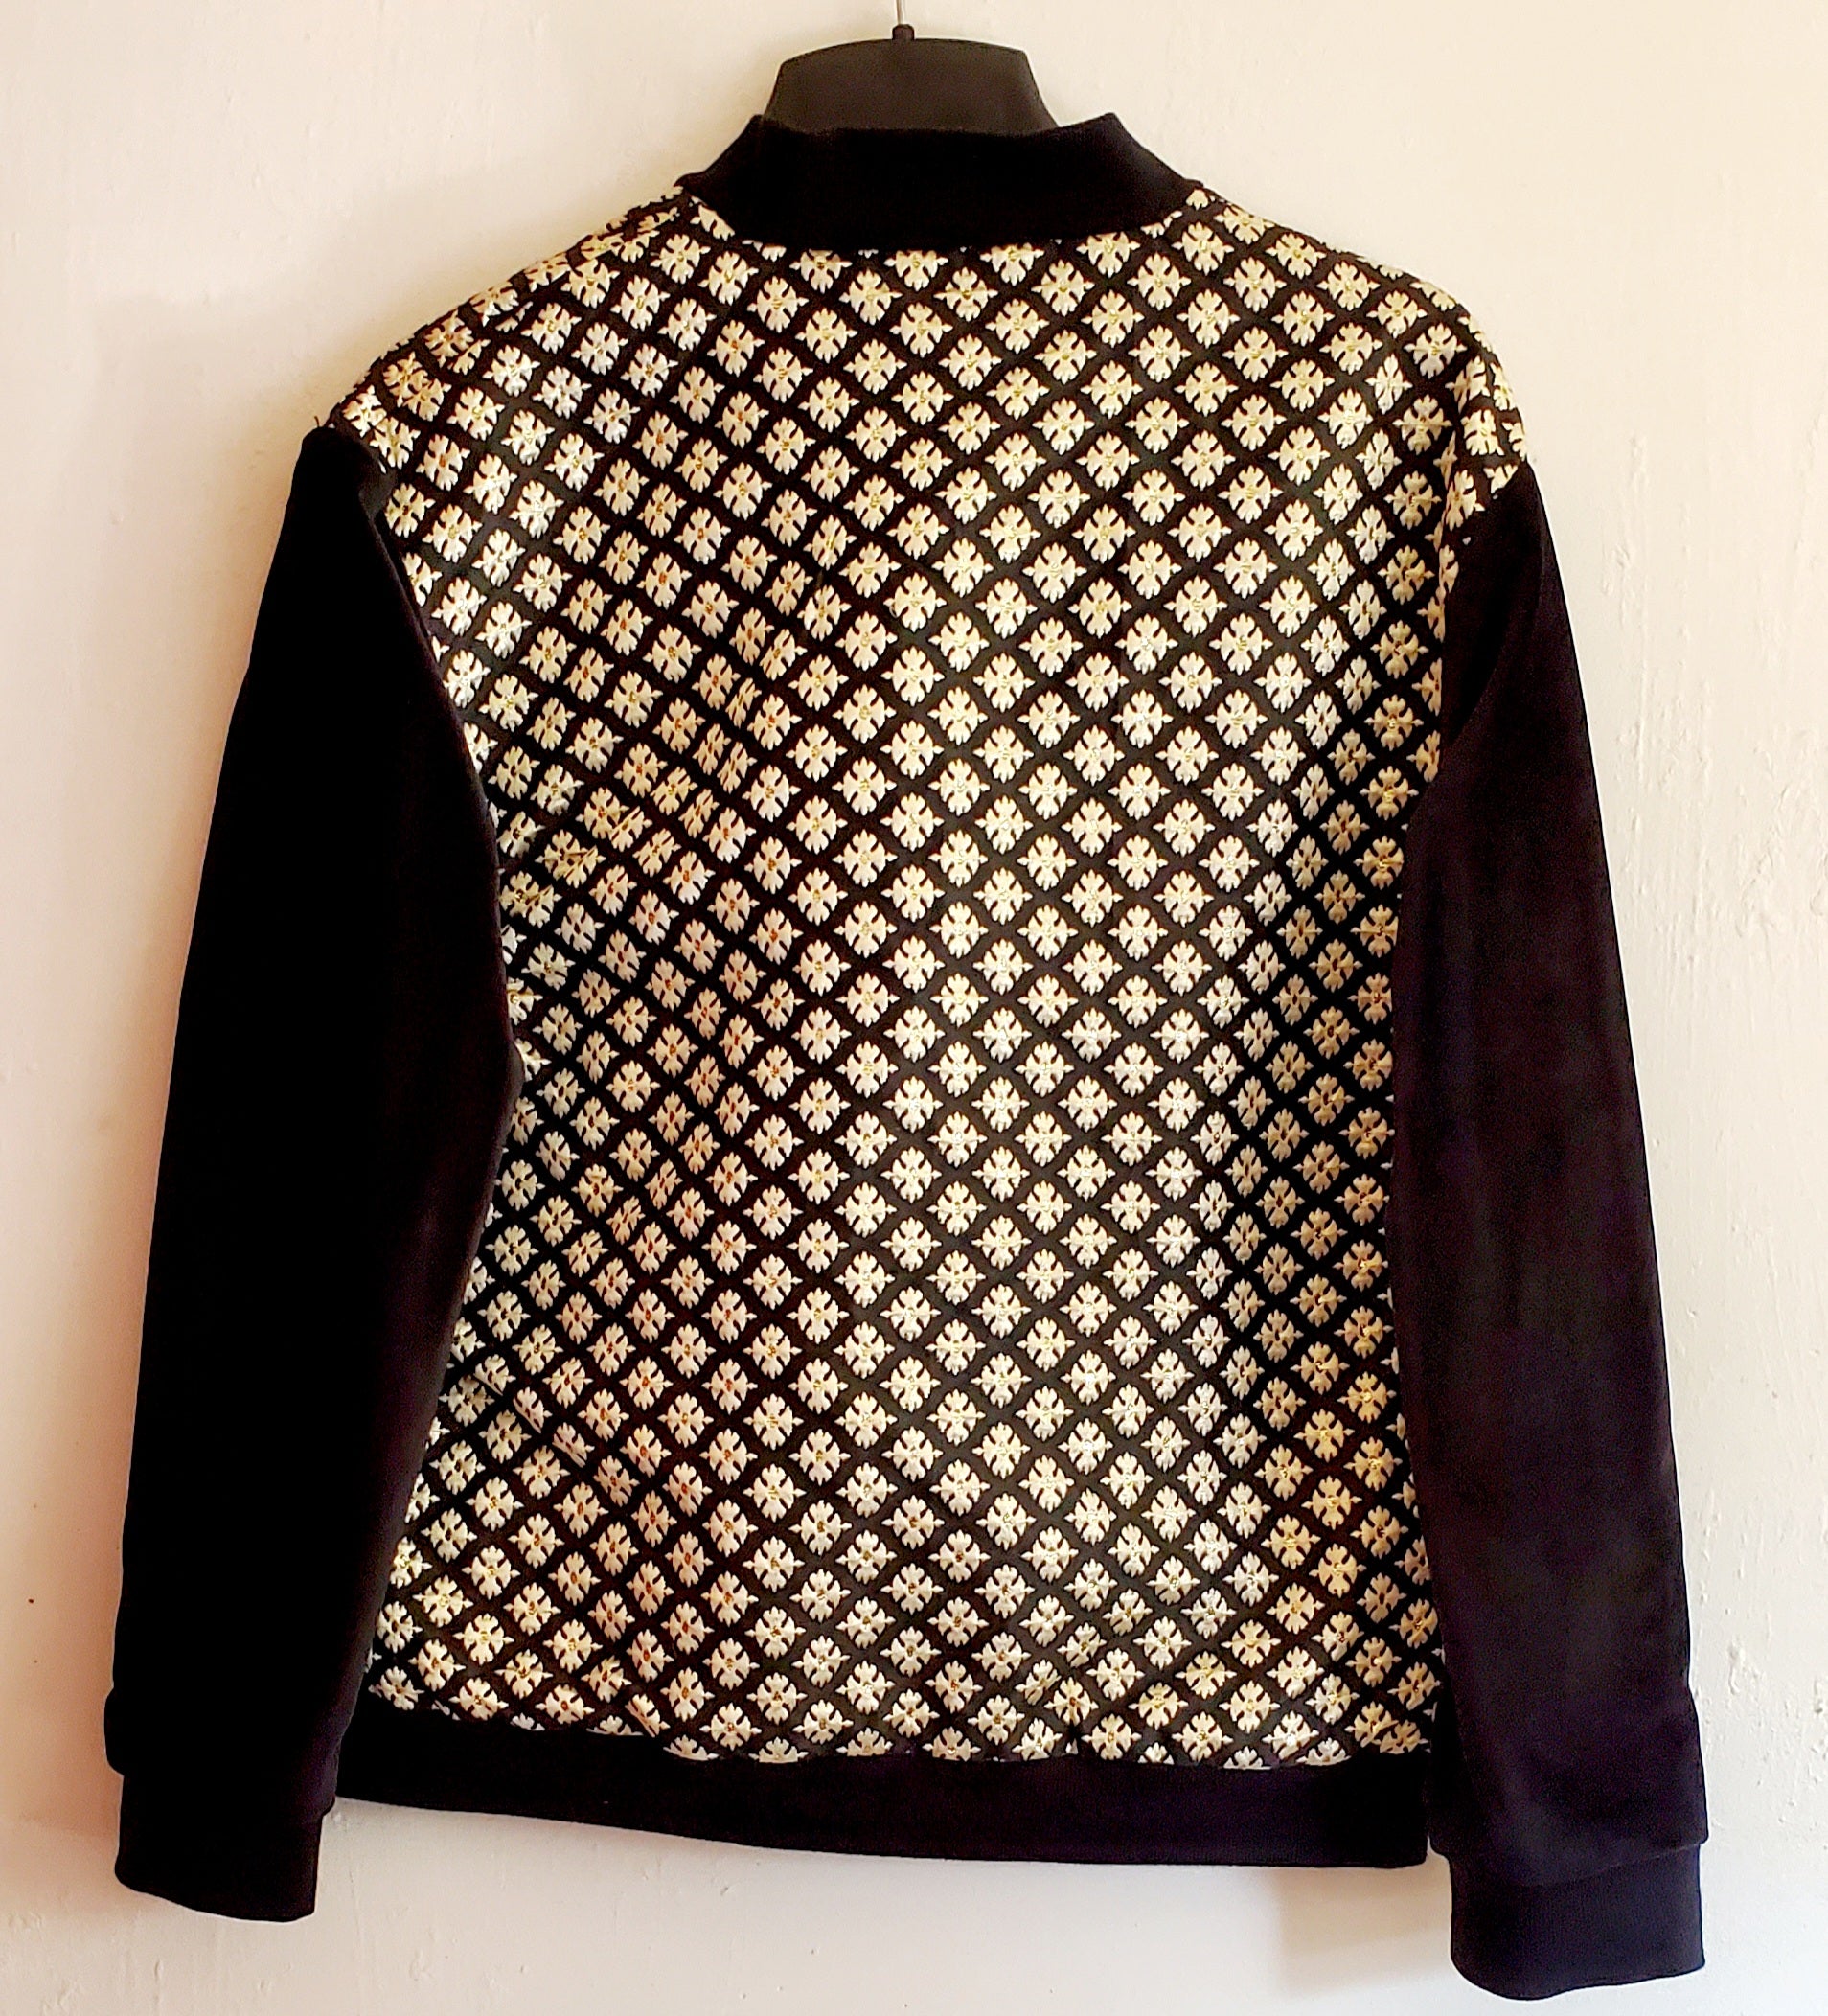 Back view of black and gold brocade bomber jacket on white background.